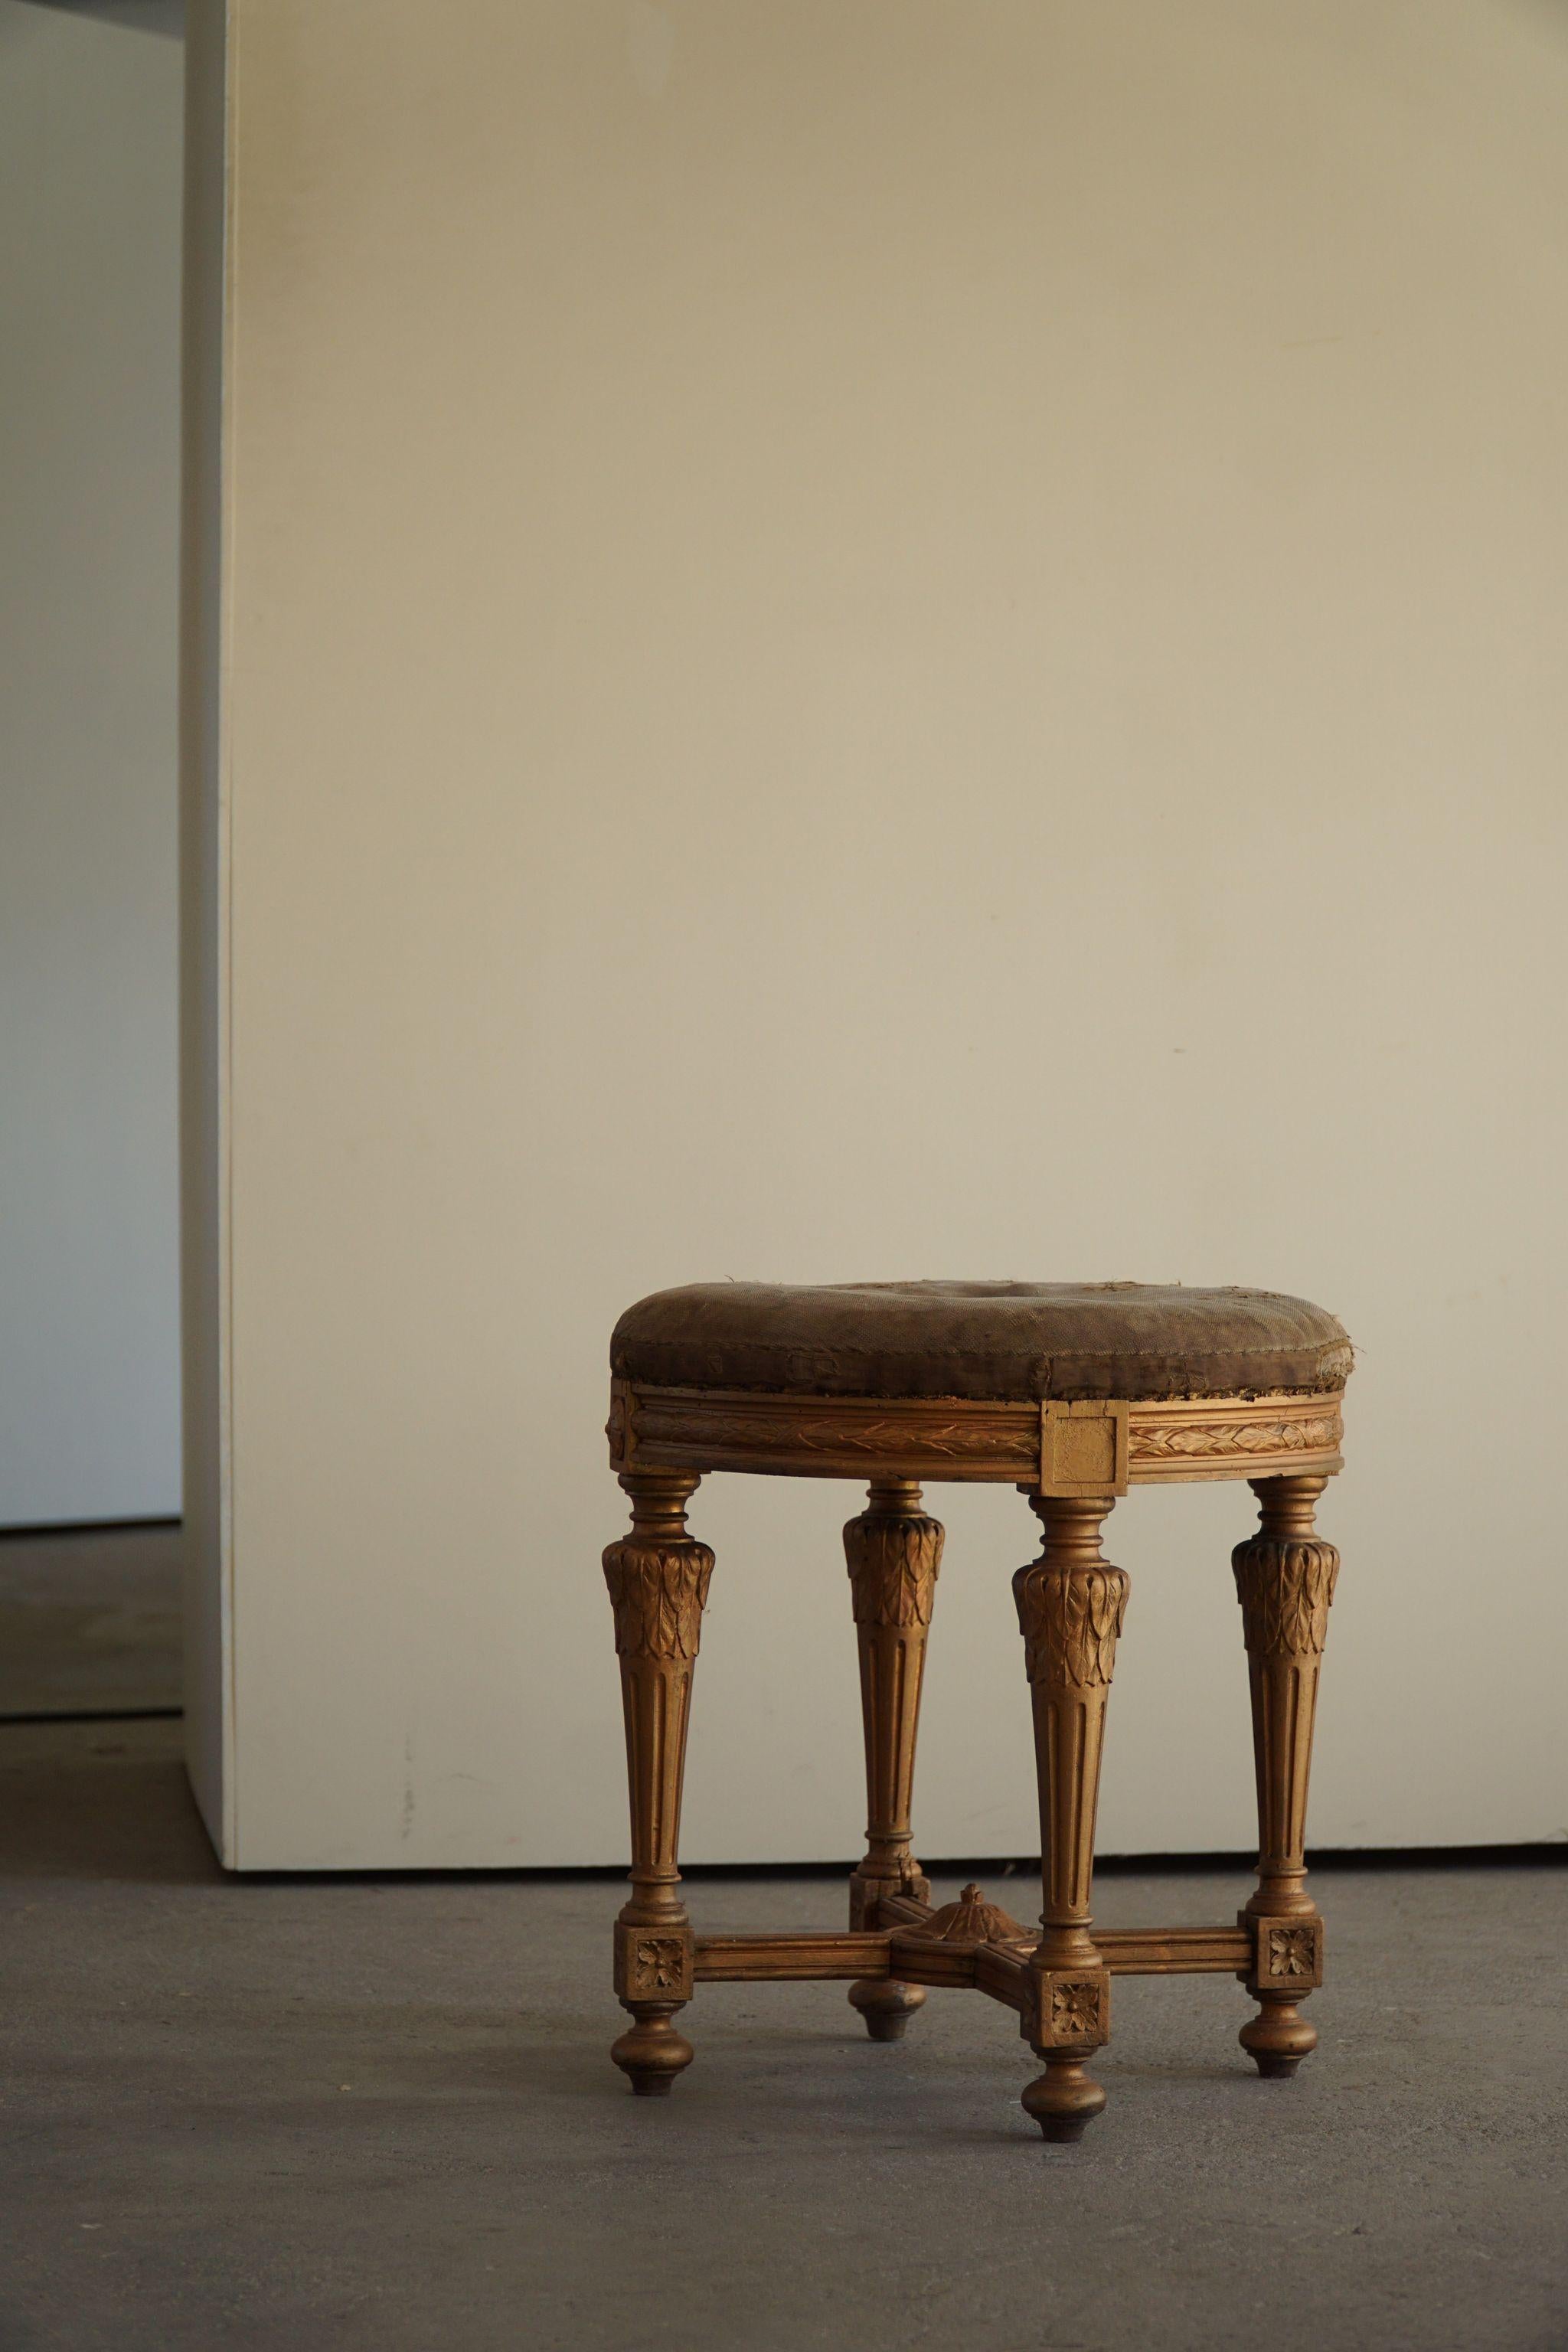 Gustavian Antique, Round Stool, Swedish Cabinetmaker, Late 18th Century For Sale 1